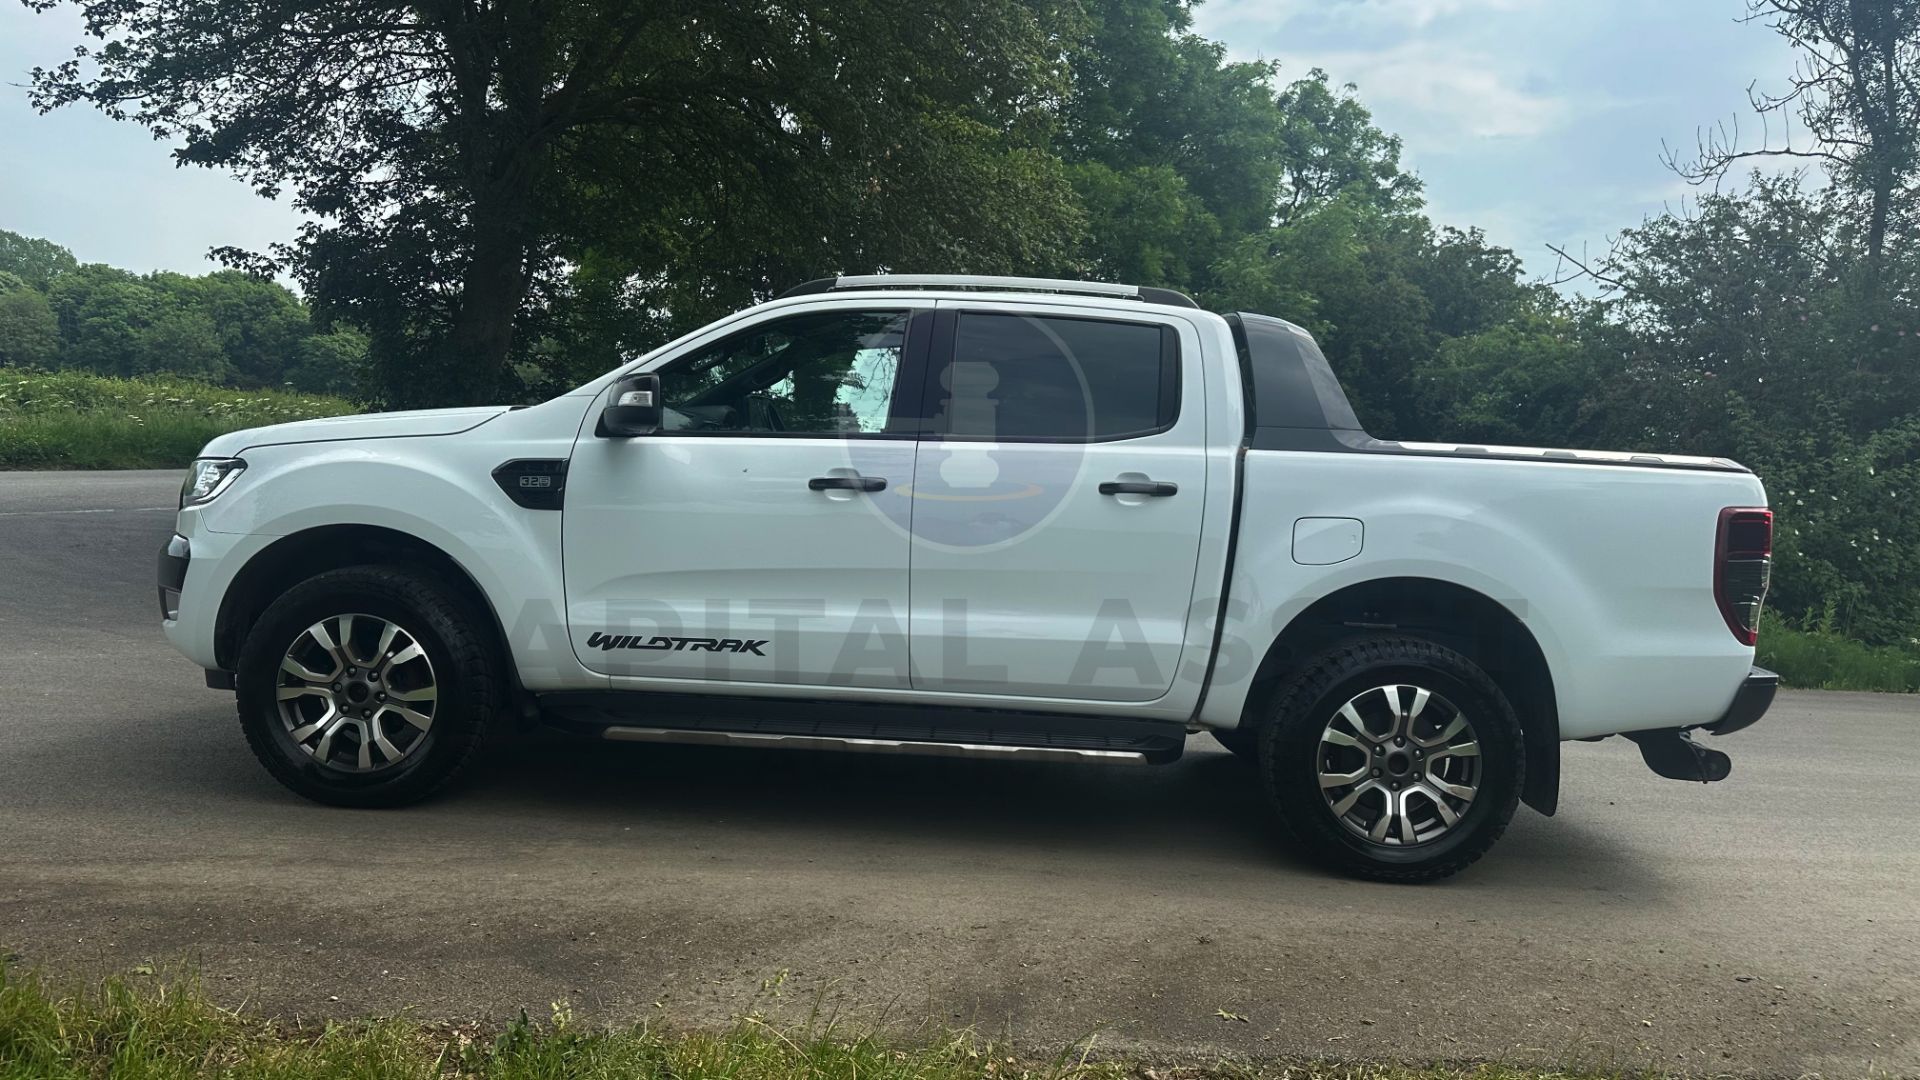 (ON SALE) FORD RANGER *WILDTRAK* DOUBLE CAB PICK-UP (2019 - EURO 6) 3.2 TDCI - AUTOMATIC (1 OWNER) - Image 8 of 50